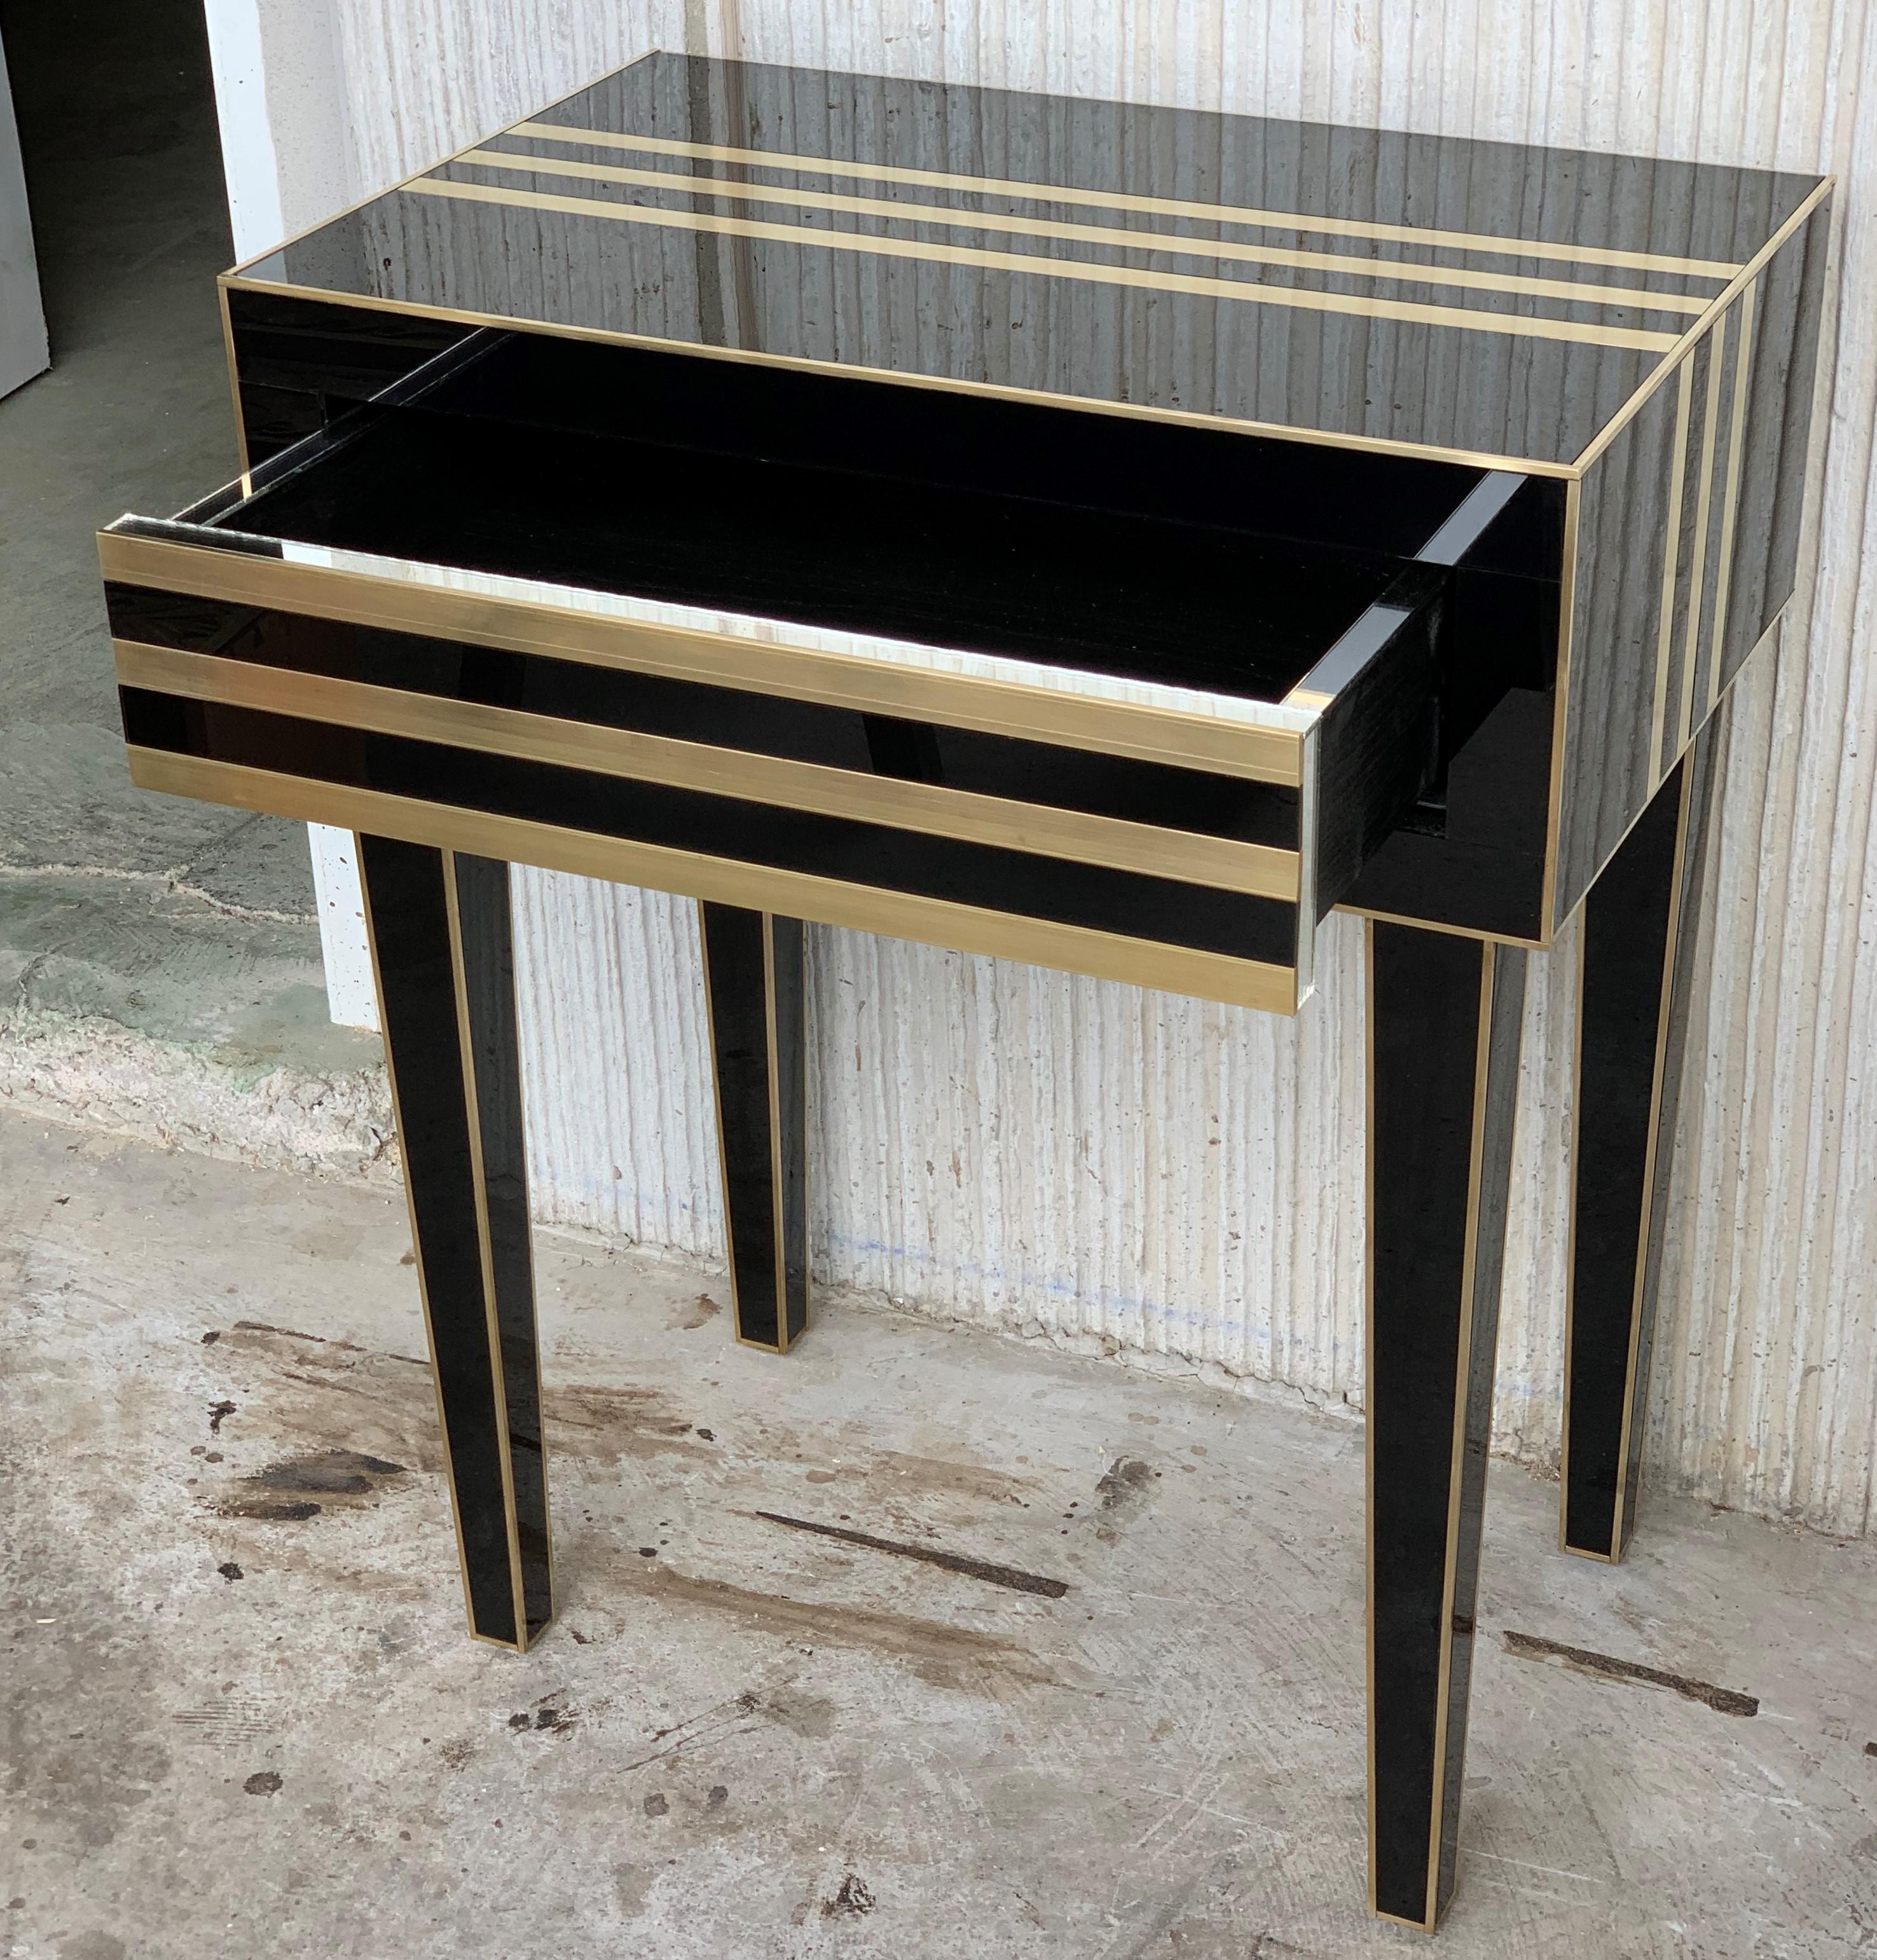 New Pair of High Black and Brass Nightstands with Drawer, Push System Opening 5